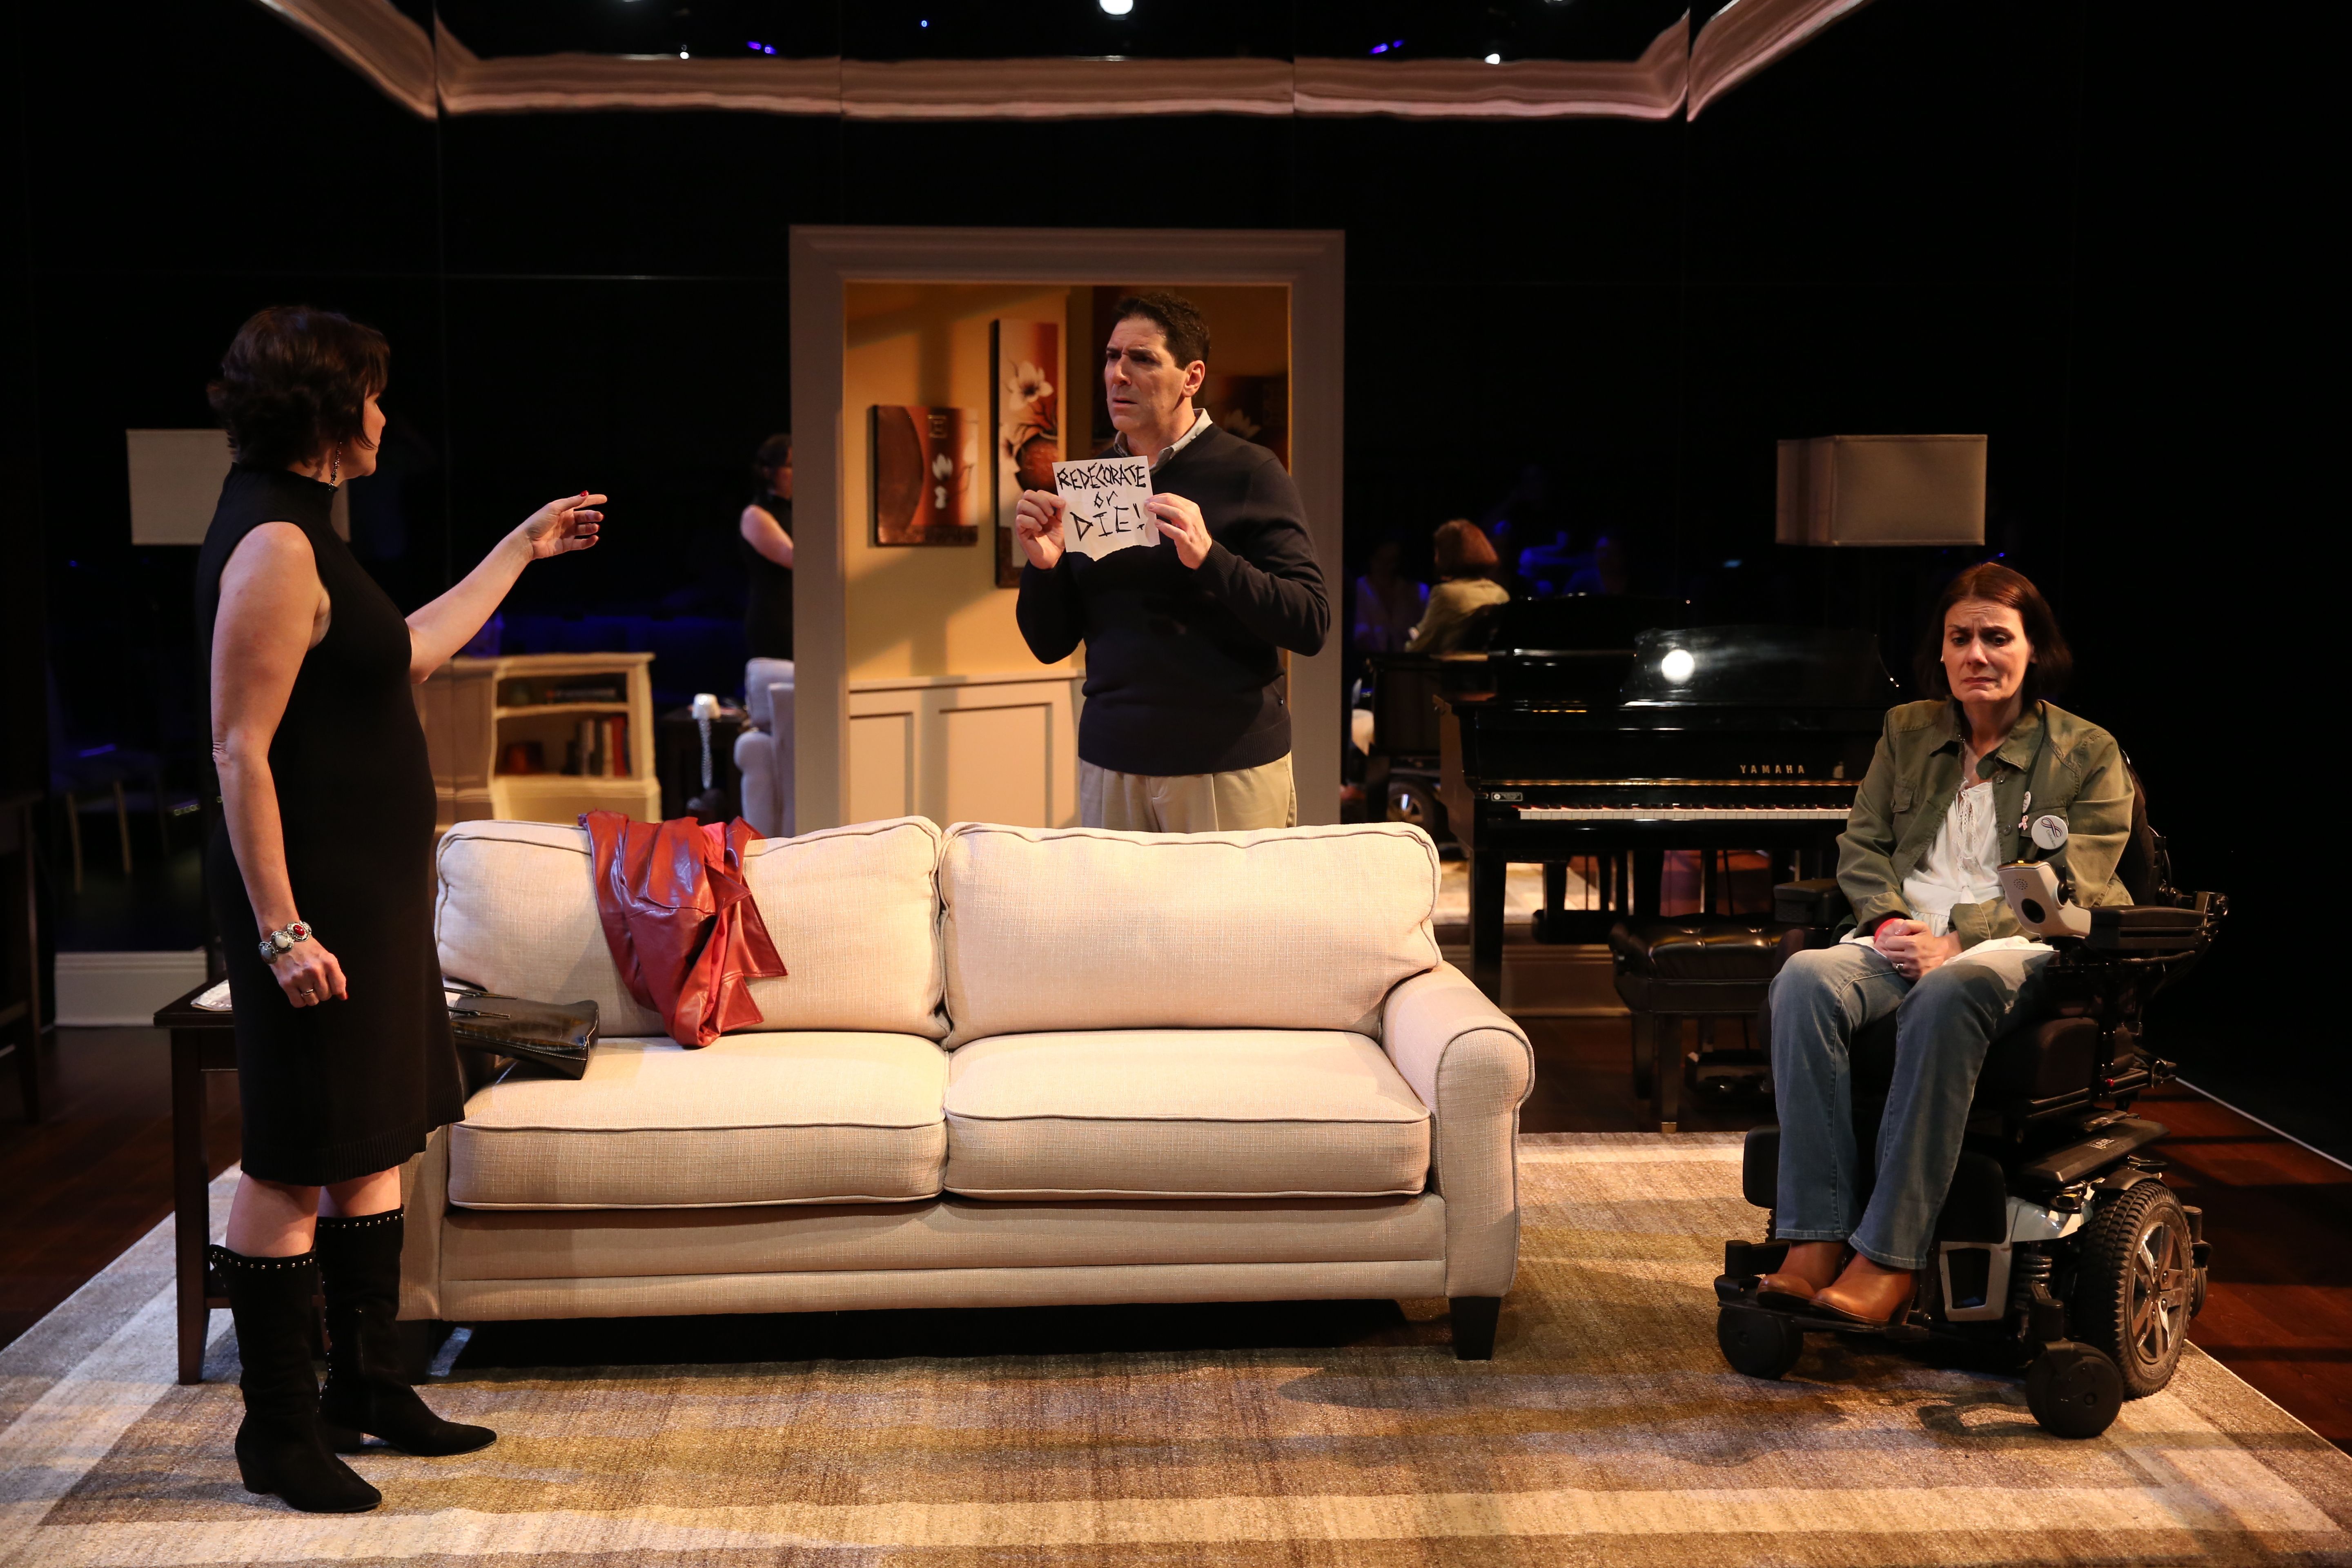 A picture of three actors who’re both sitting and standing, and they’re performing a scene from The Fourth Wall. The actor on the left is pointing her finger to the middle actor who is holding up a sign. The actor on the right is looking sad.